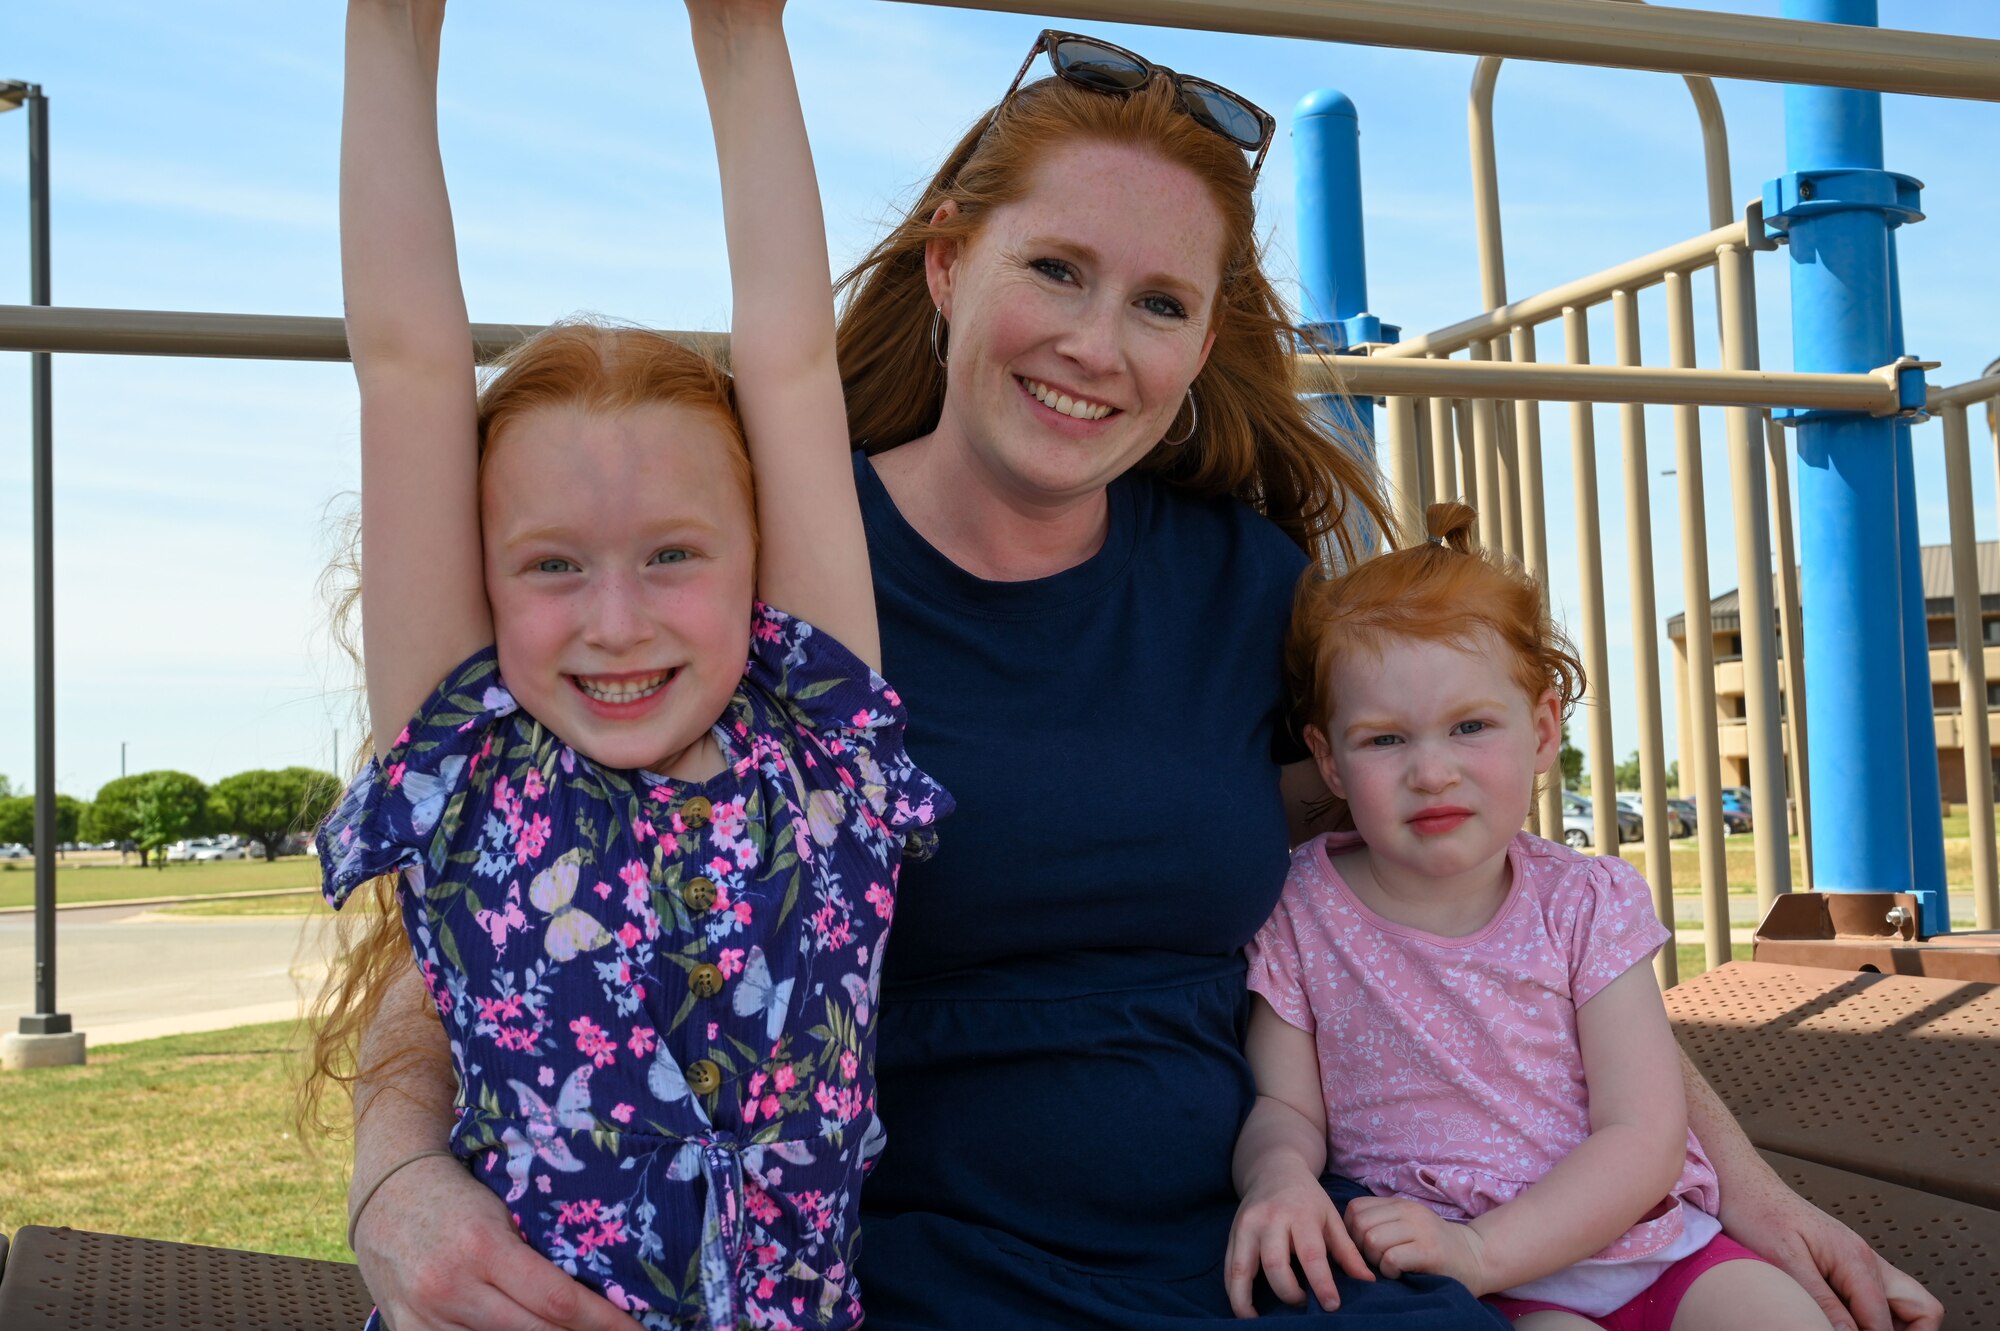 Ashley Adams, wife of Master Sgt. Kyle Adams, 97th Training Squadron first sergeant, poses for a photo with her daughters, Aubrey and Laurel, at Altus Air Force Base, Oklahoma, May 9, 2023. There are more active duty family members than active duty members in the Department of Defense. (U.S. Air Force photo by Senior Airman Kayla Christenson)